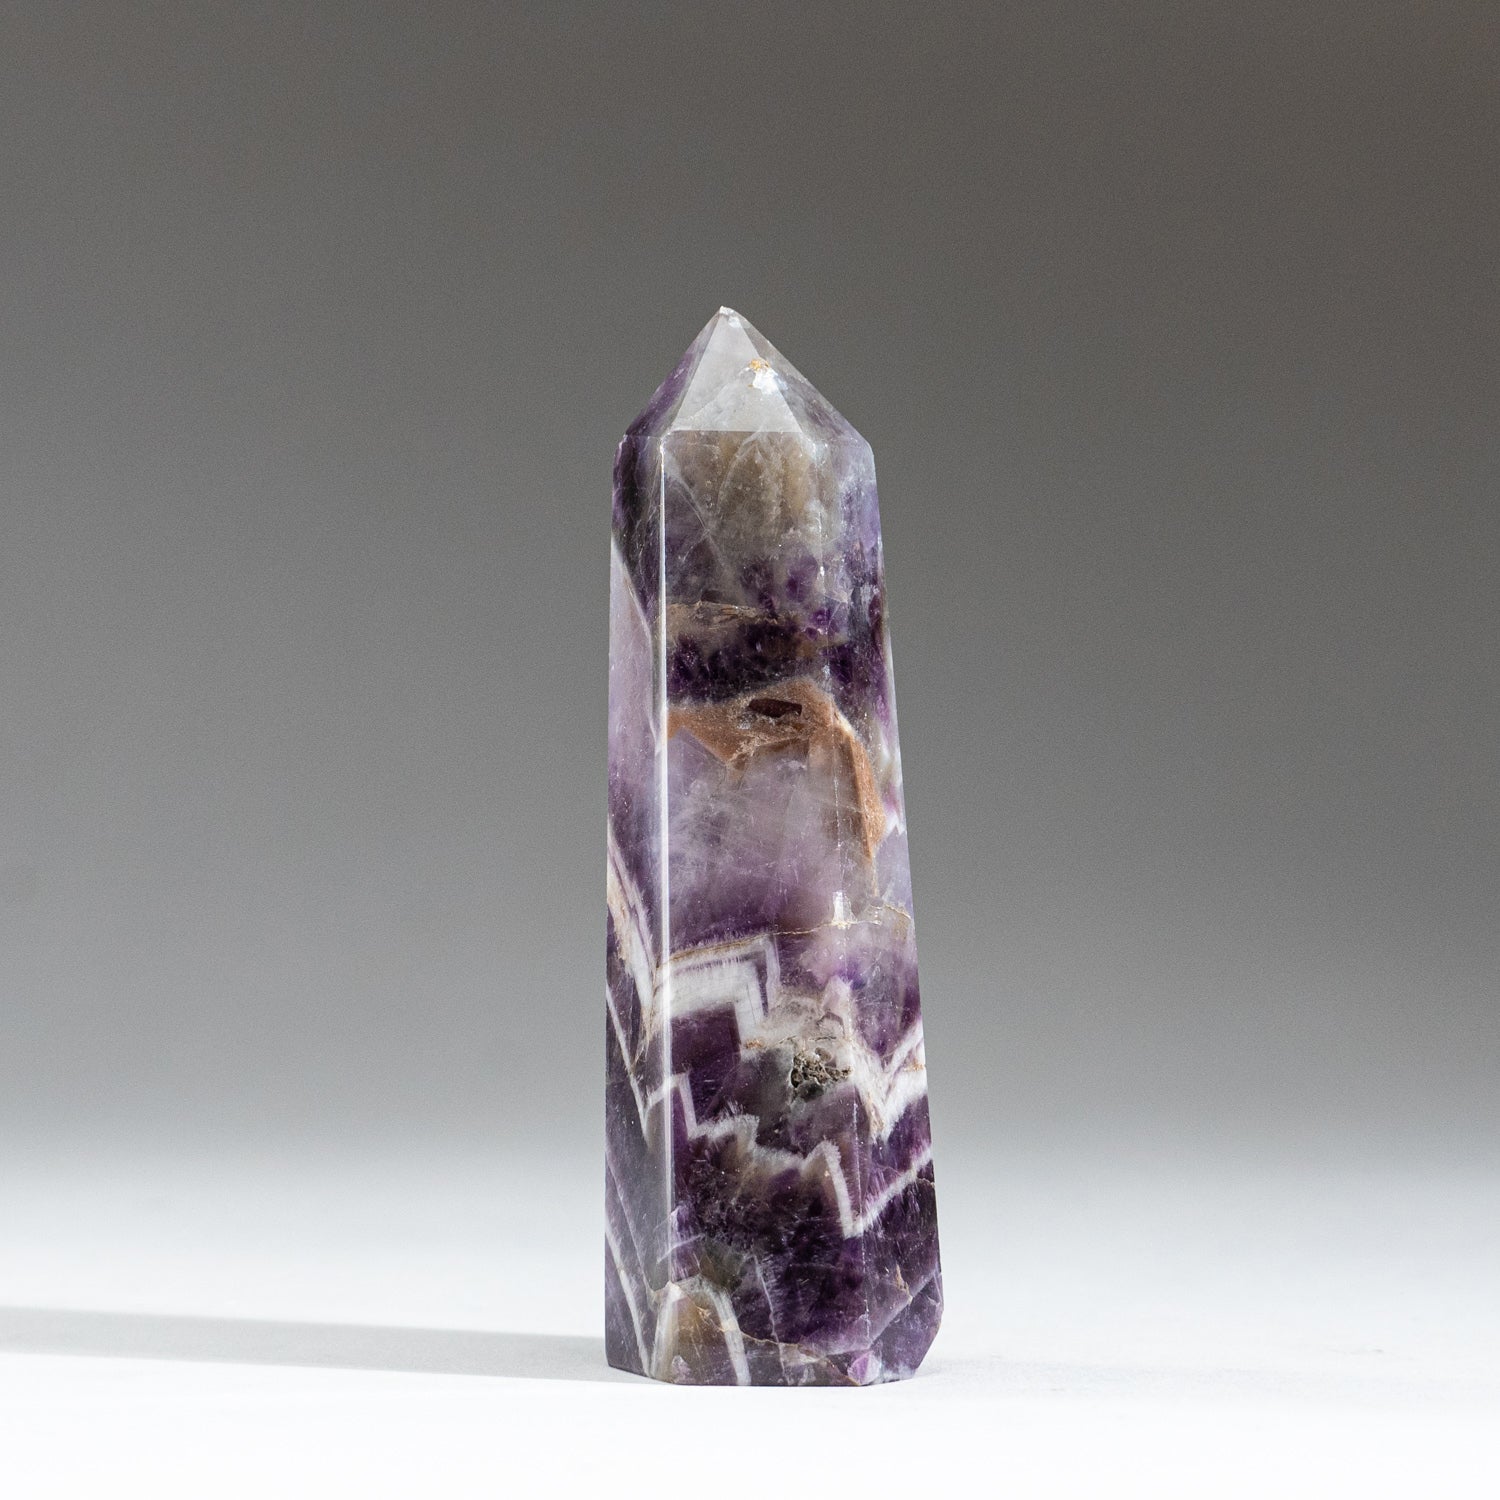 Polished Chevron Amethyst Point from Brazil (130 grams)